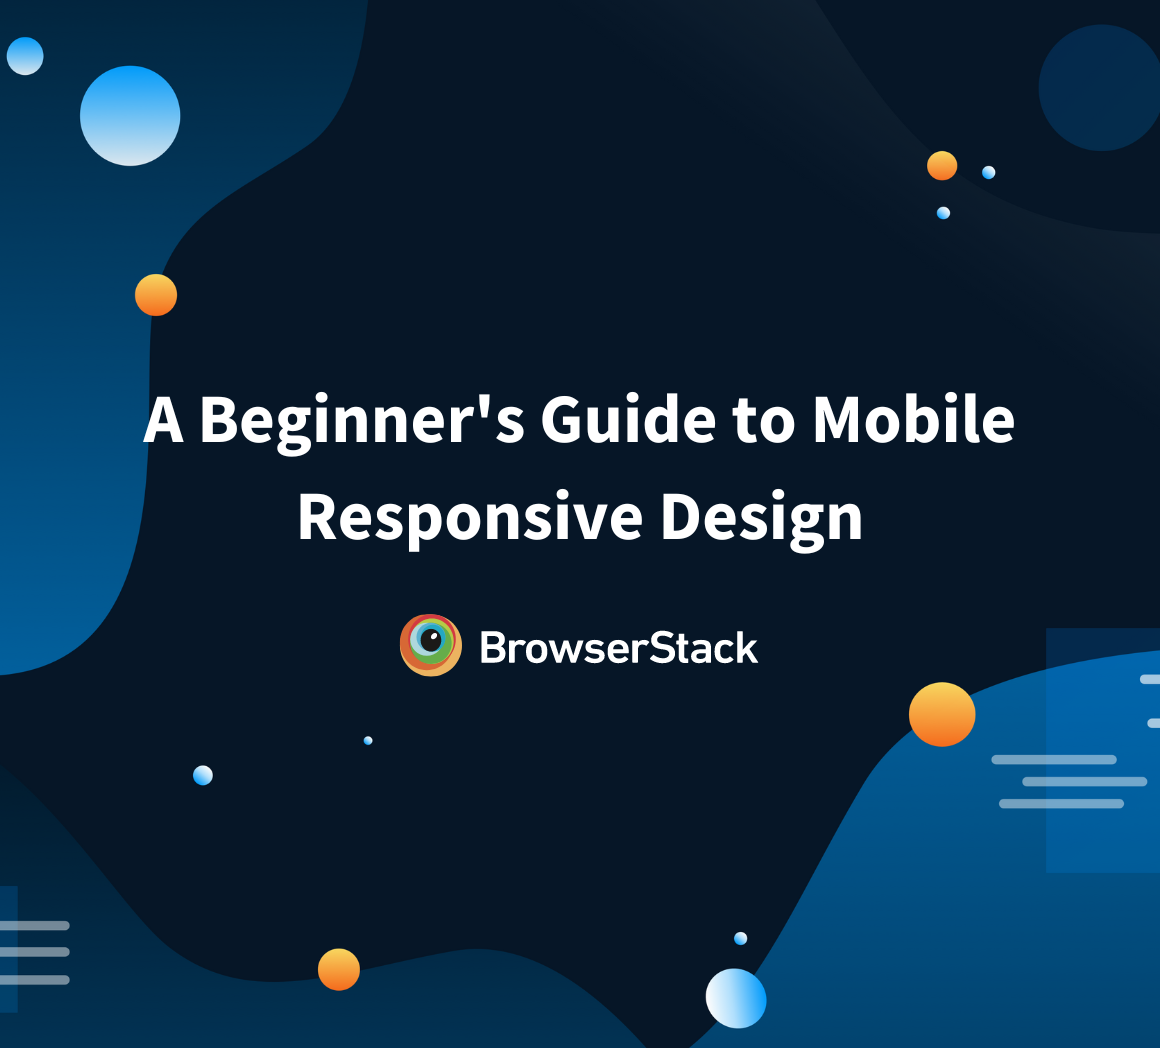 A Beginner's Guide to Mobile Responsive Design